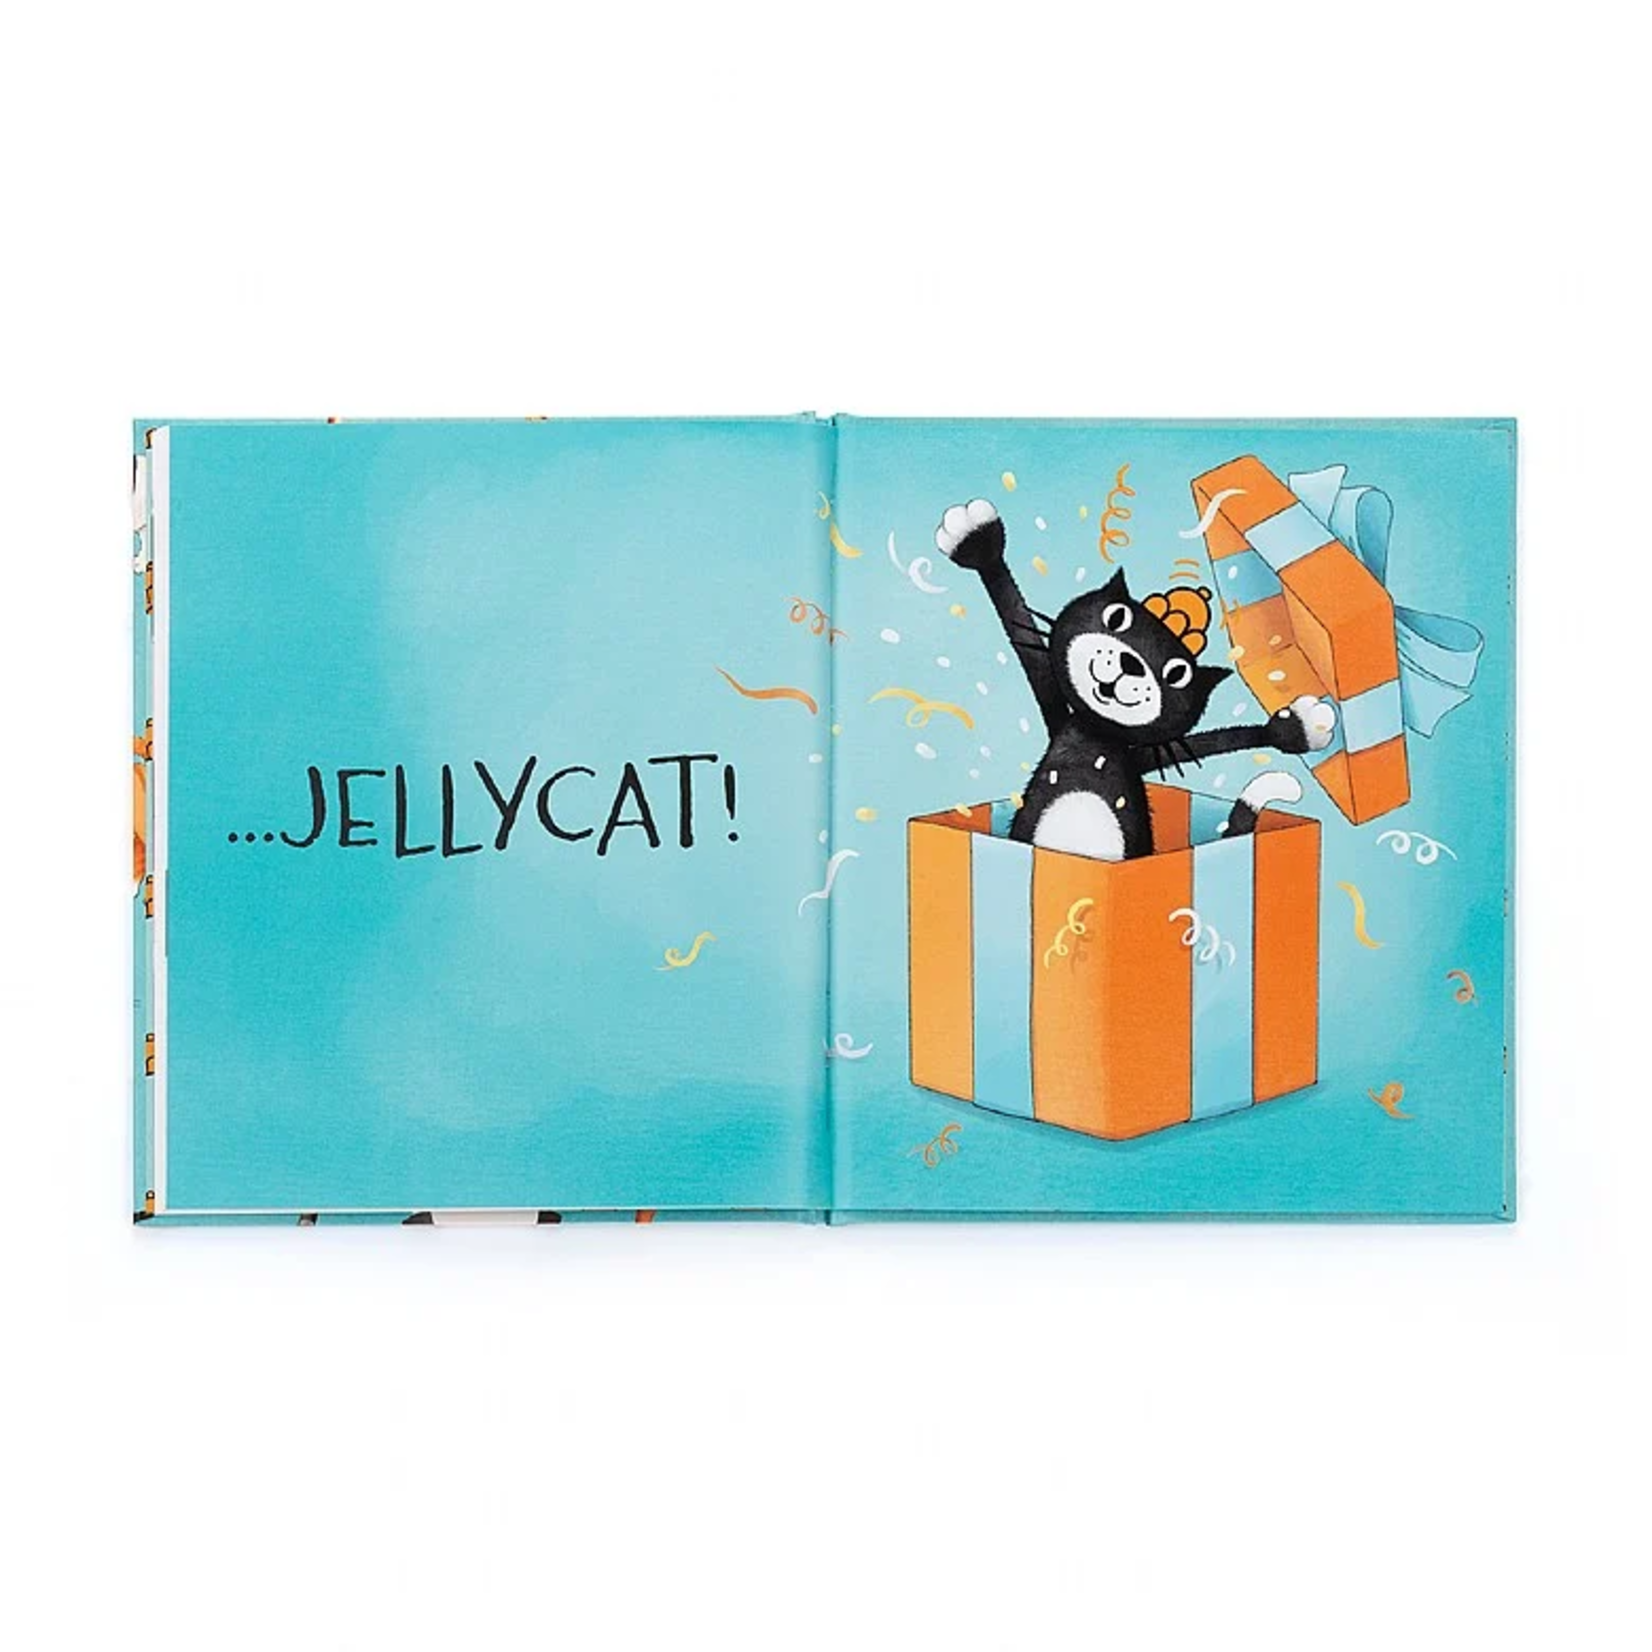 Jellycat Jellycat - All Kinds of Cats Book